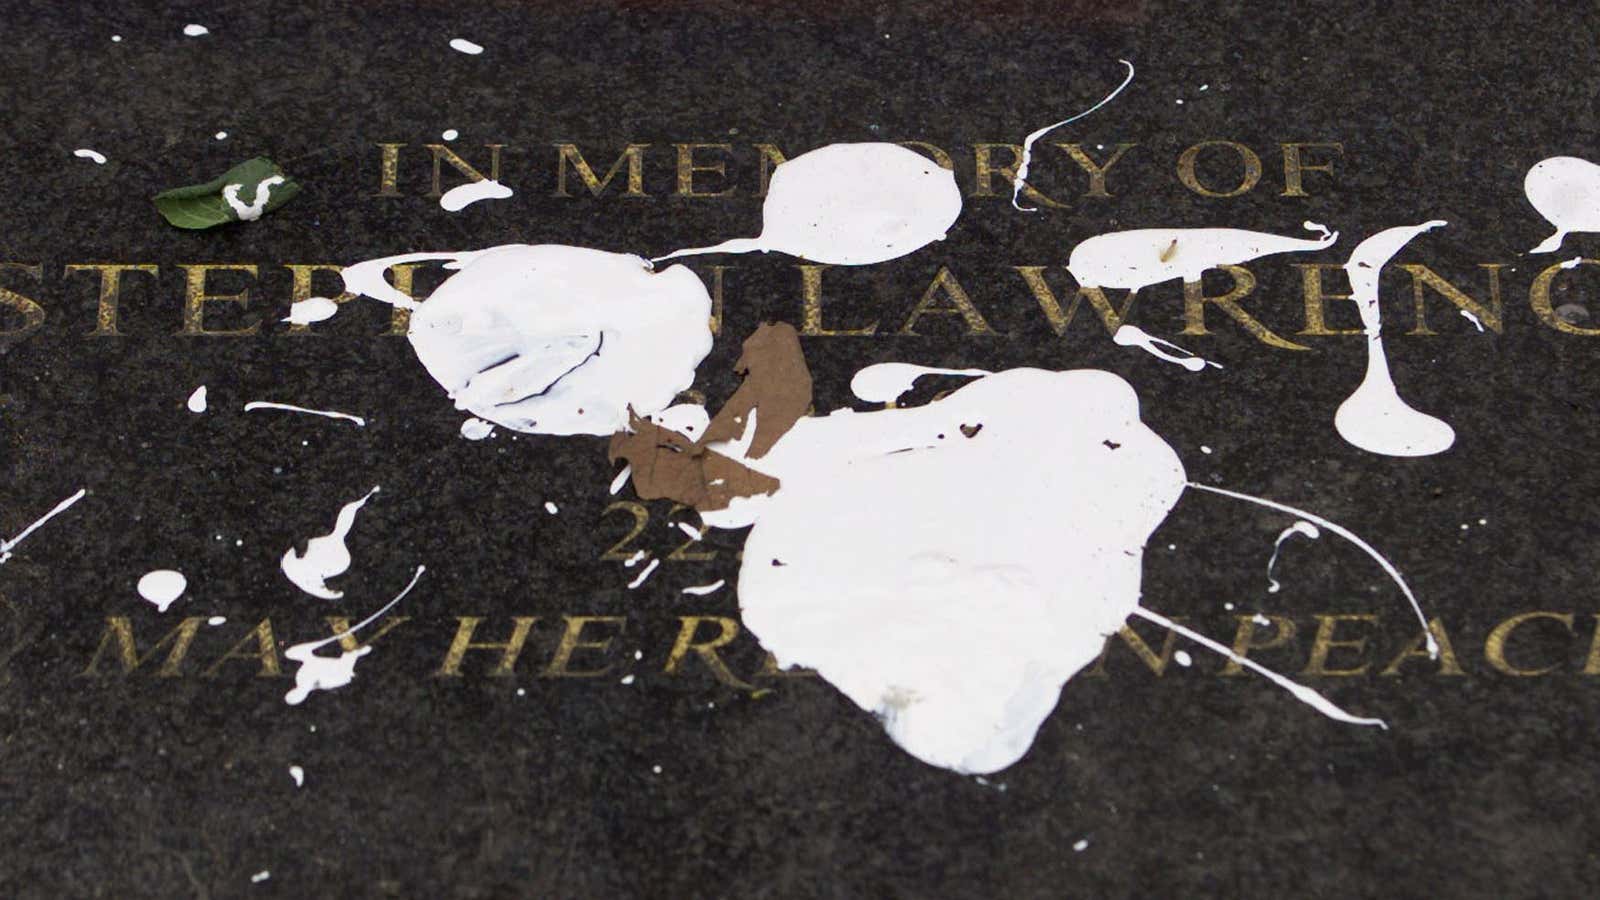 Hours after a 1999 report found the British police guilty of “institutional racism” in probing a black teenager’s murder, his grave was defaced.